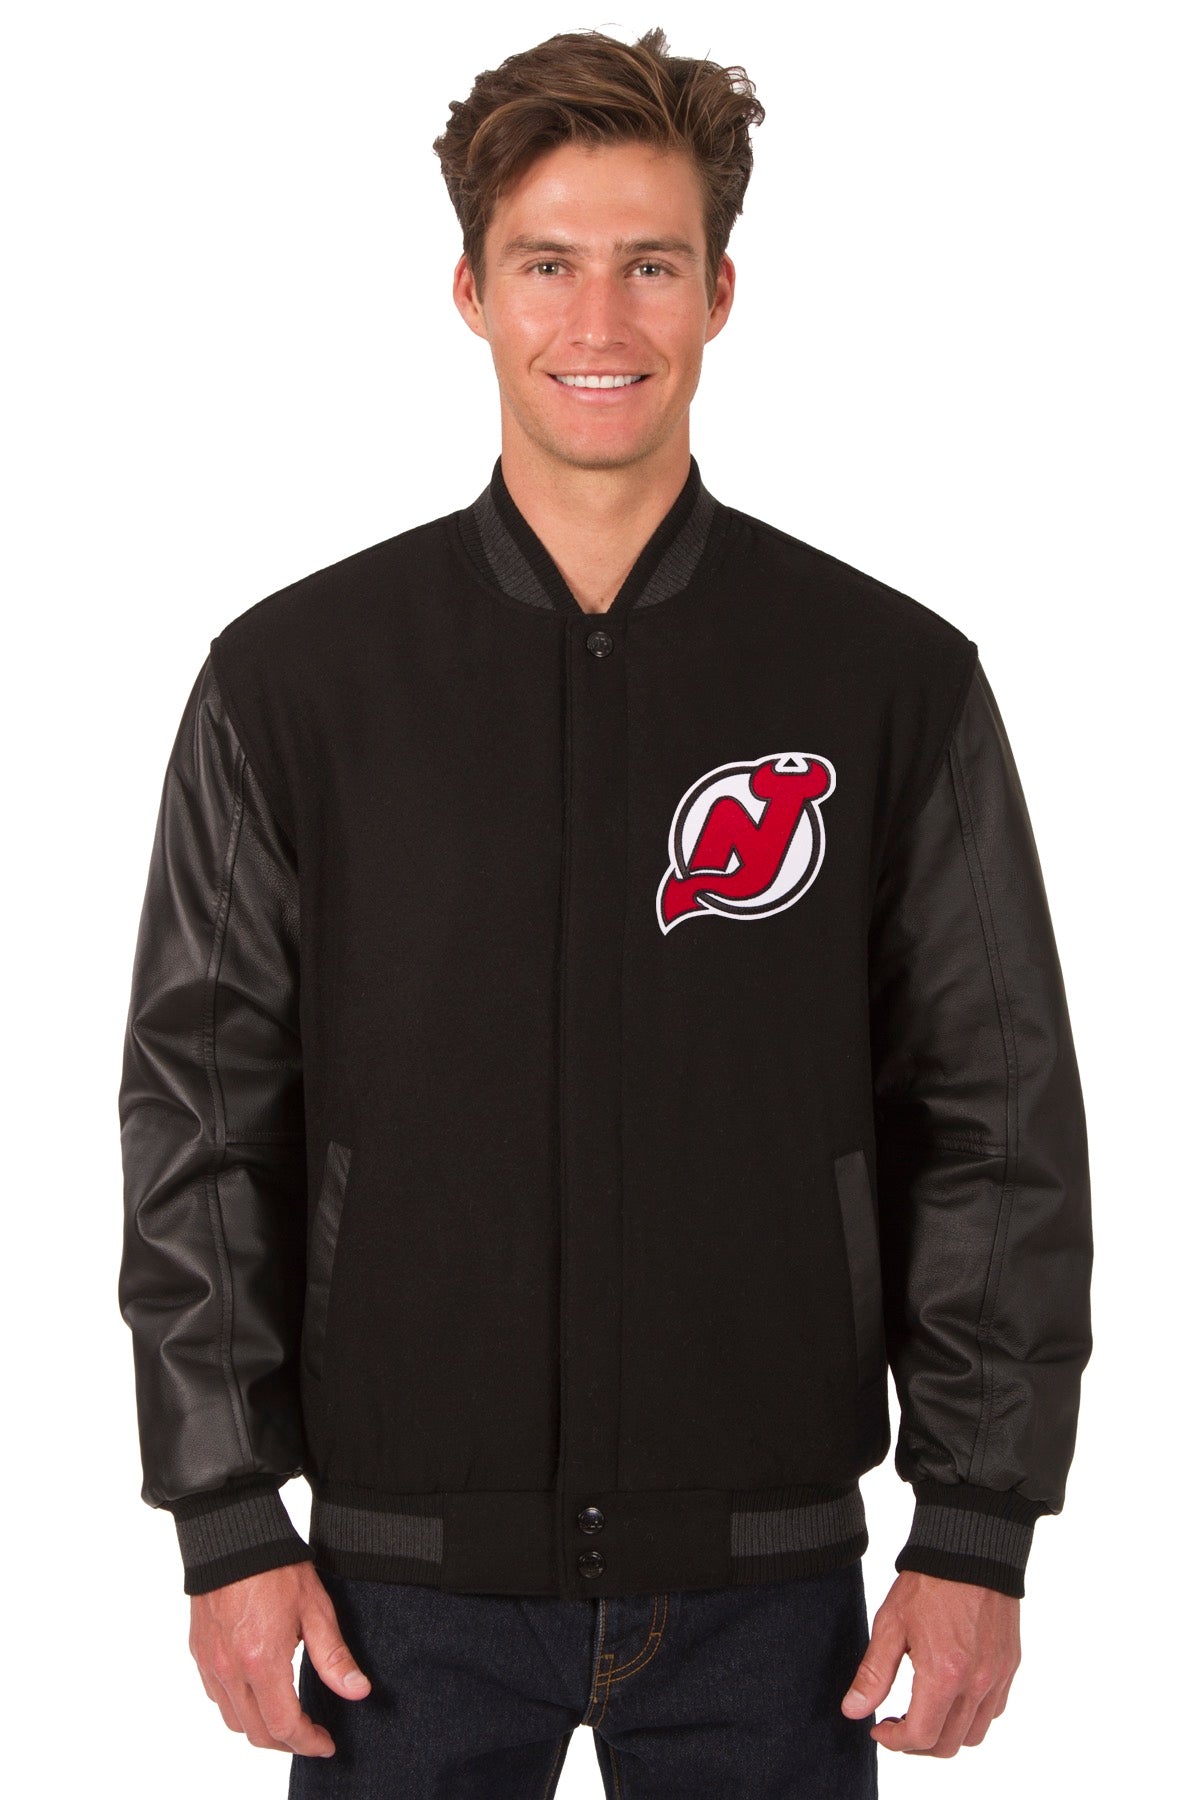 New Jersey Devils Wool and Leather Reversible Jacket